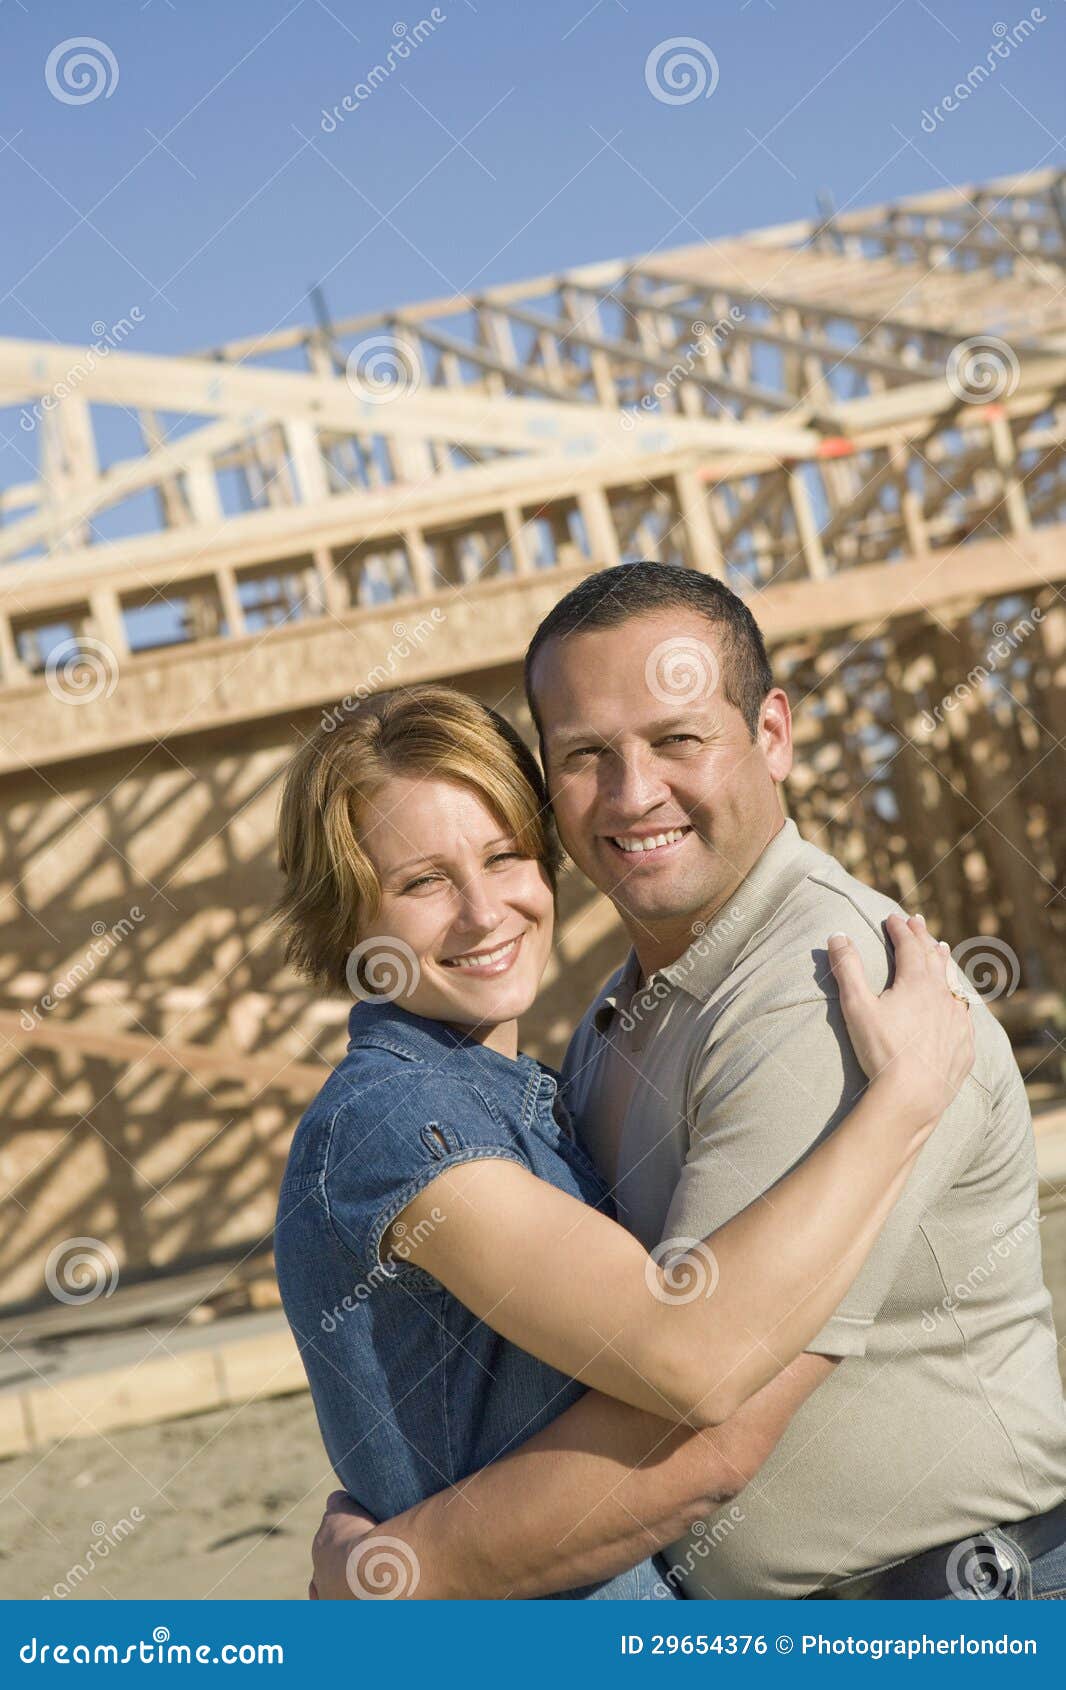 couple embracing in front of incomplete house